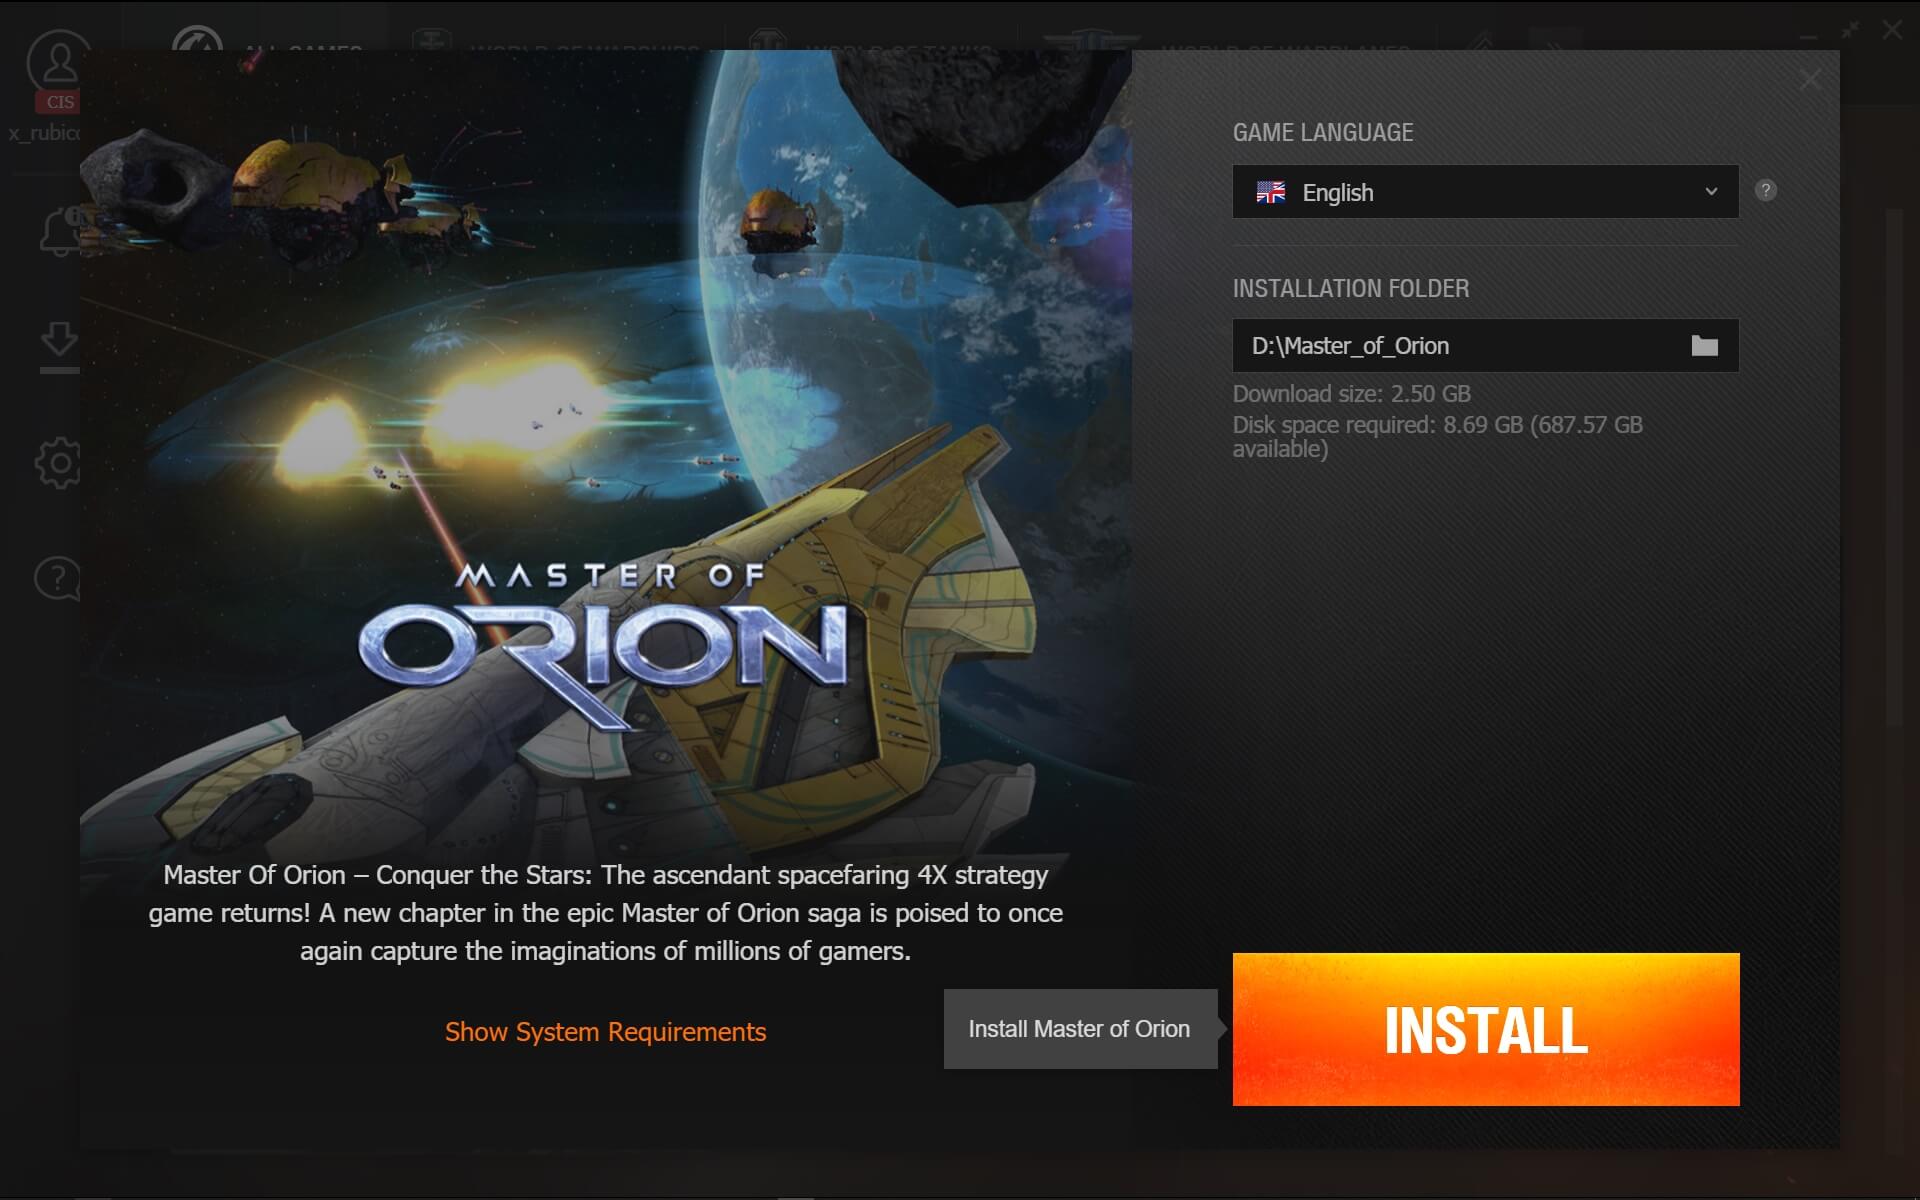 master of orion conquer the stars cheat codes